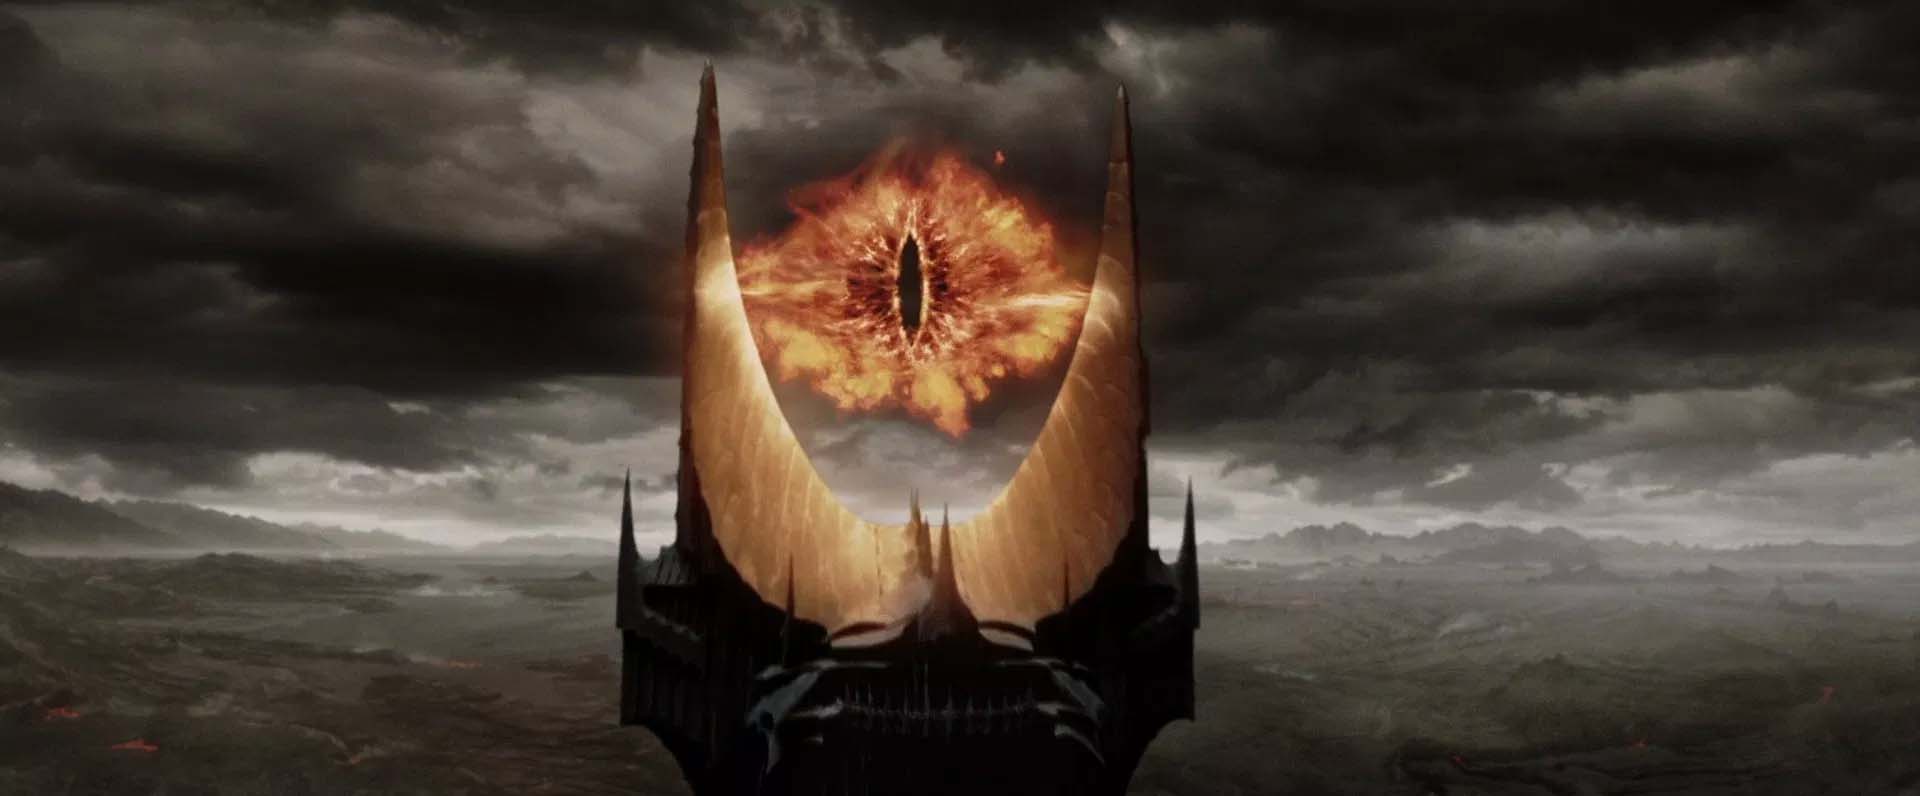 Why did Sauron attack Minas Tirith in The Lord of the Rings (LOTR